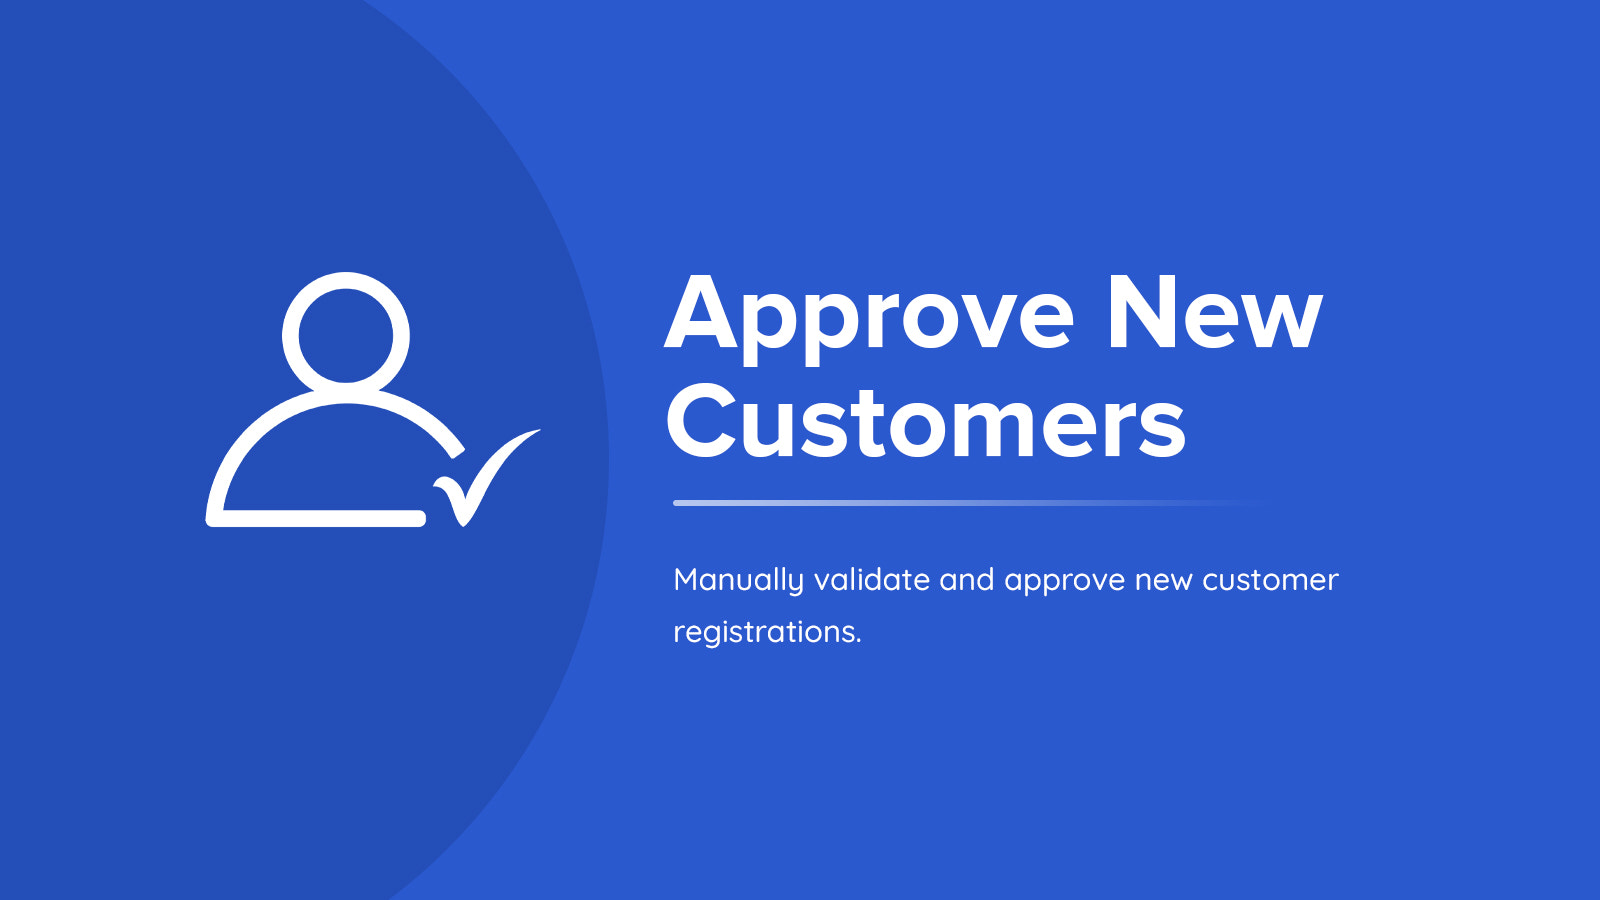 Approve New Customers